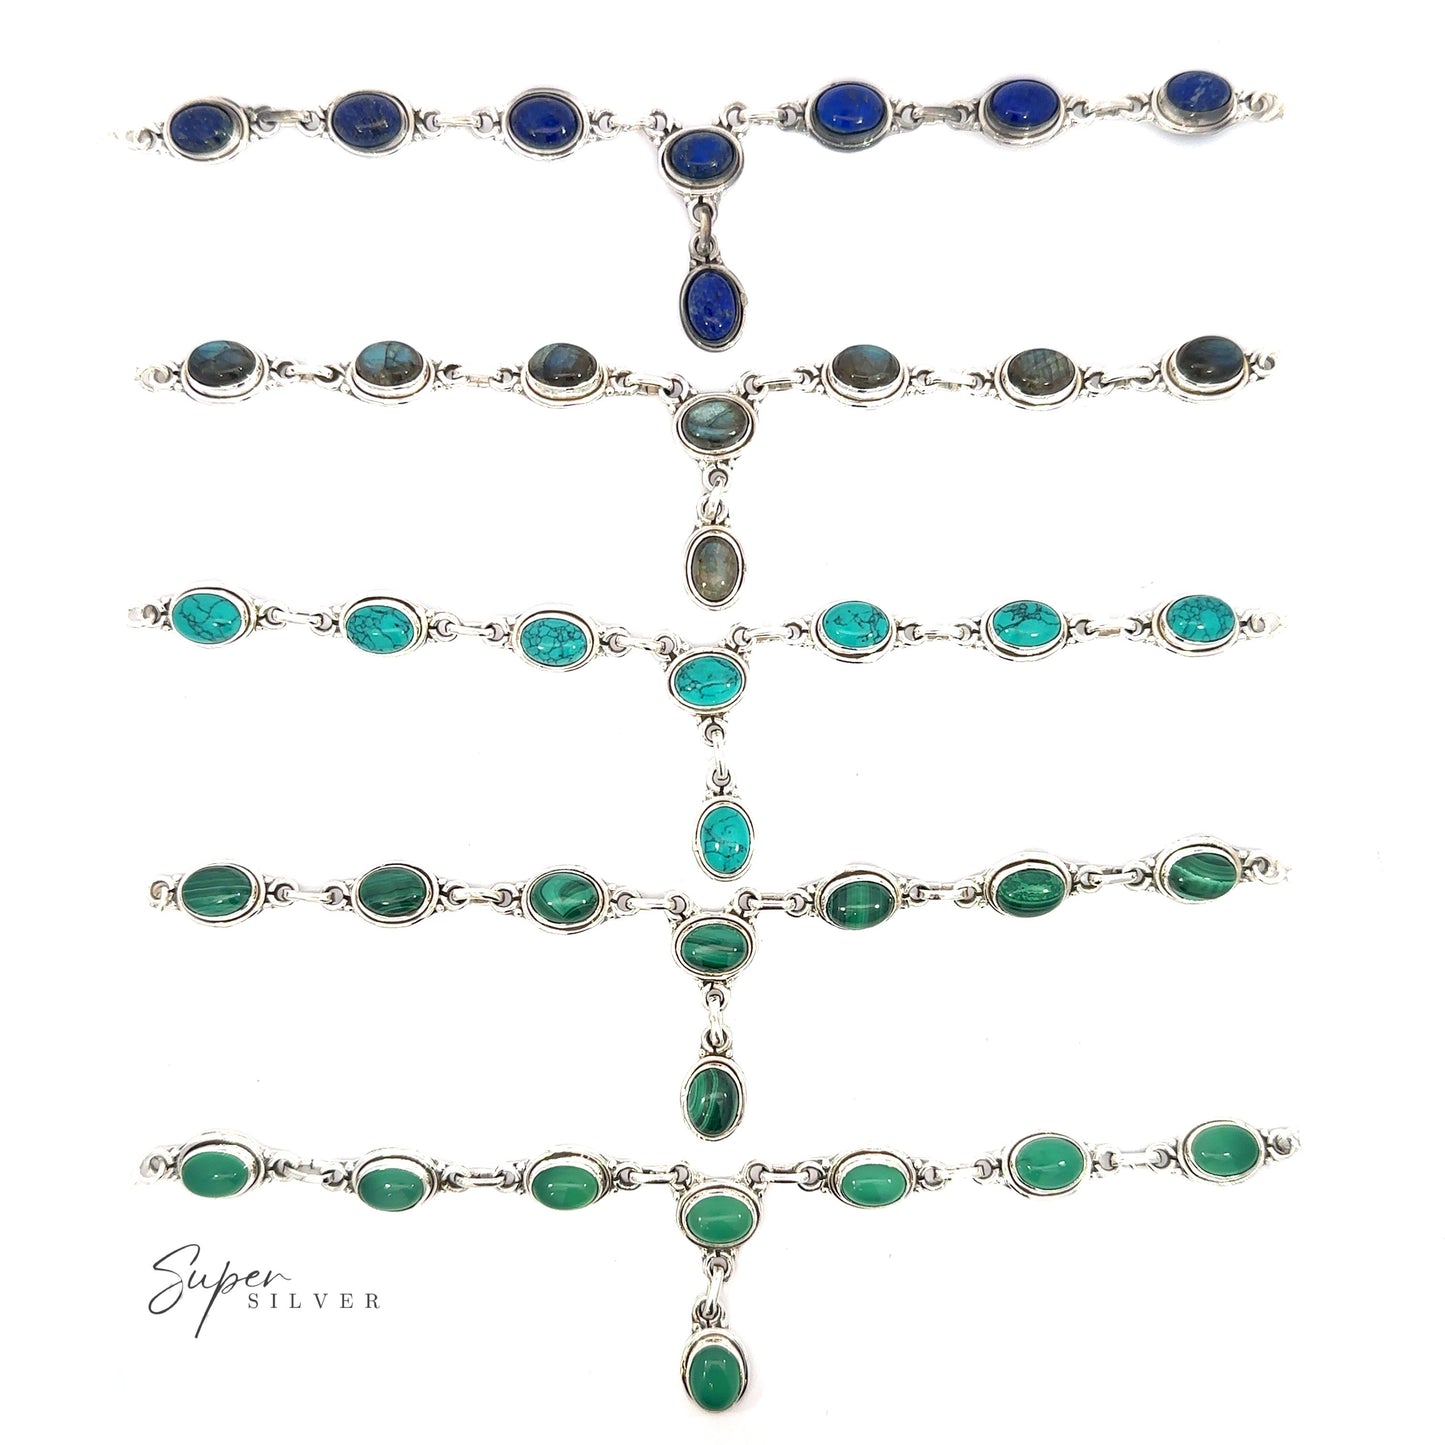 
                  
                    Seven Simple Oval Y Necklaces with green, blue, and turquoise gemstones, exuding a bohemian charm, arranged in a vertical row on a white background. The text "Super Silver" appears in the bottom left corner.
                  
                